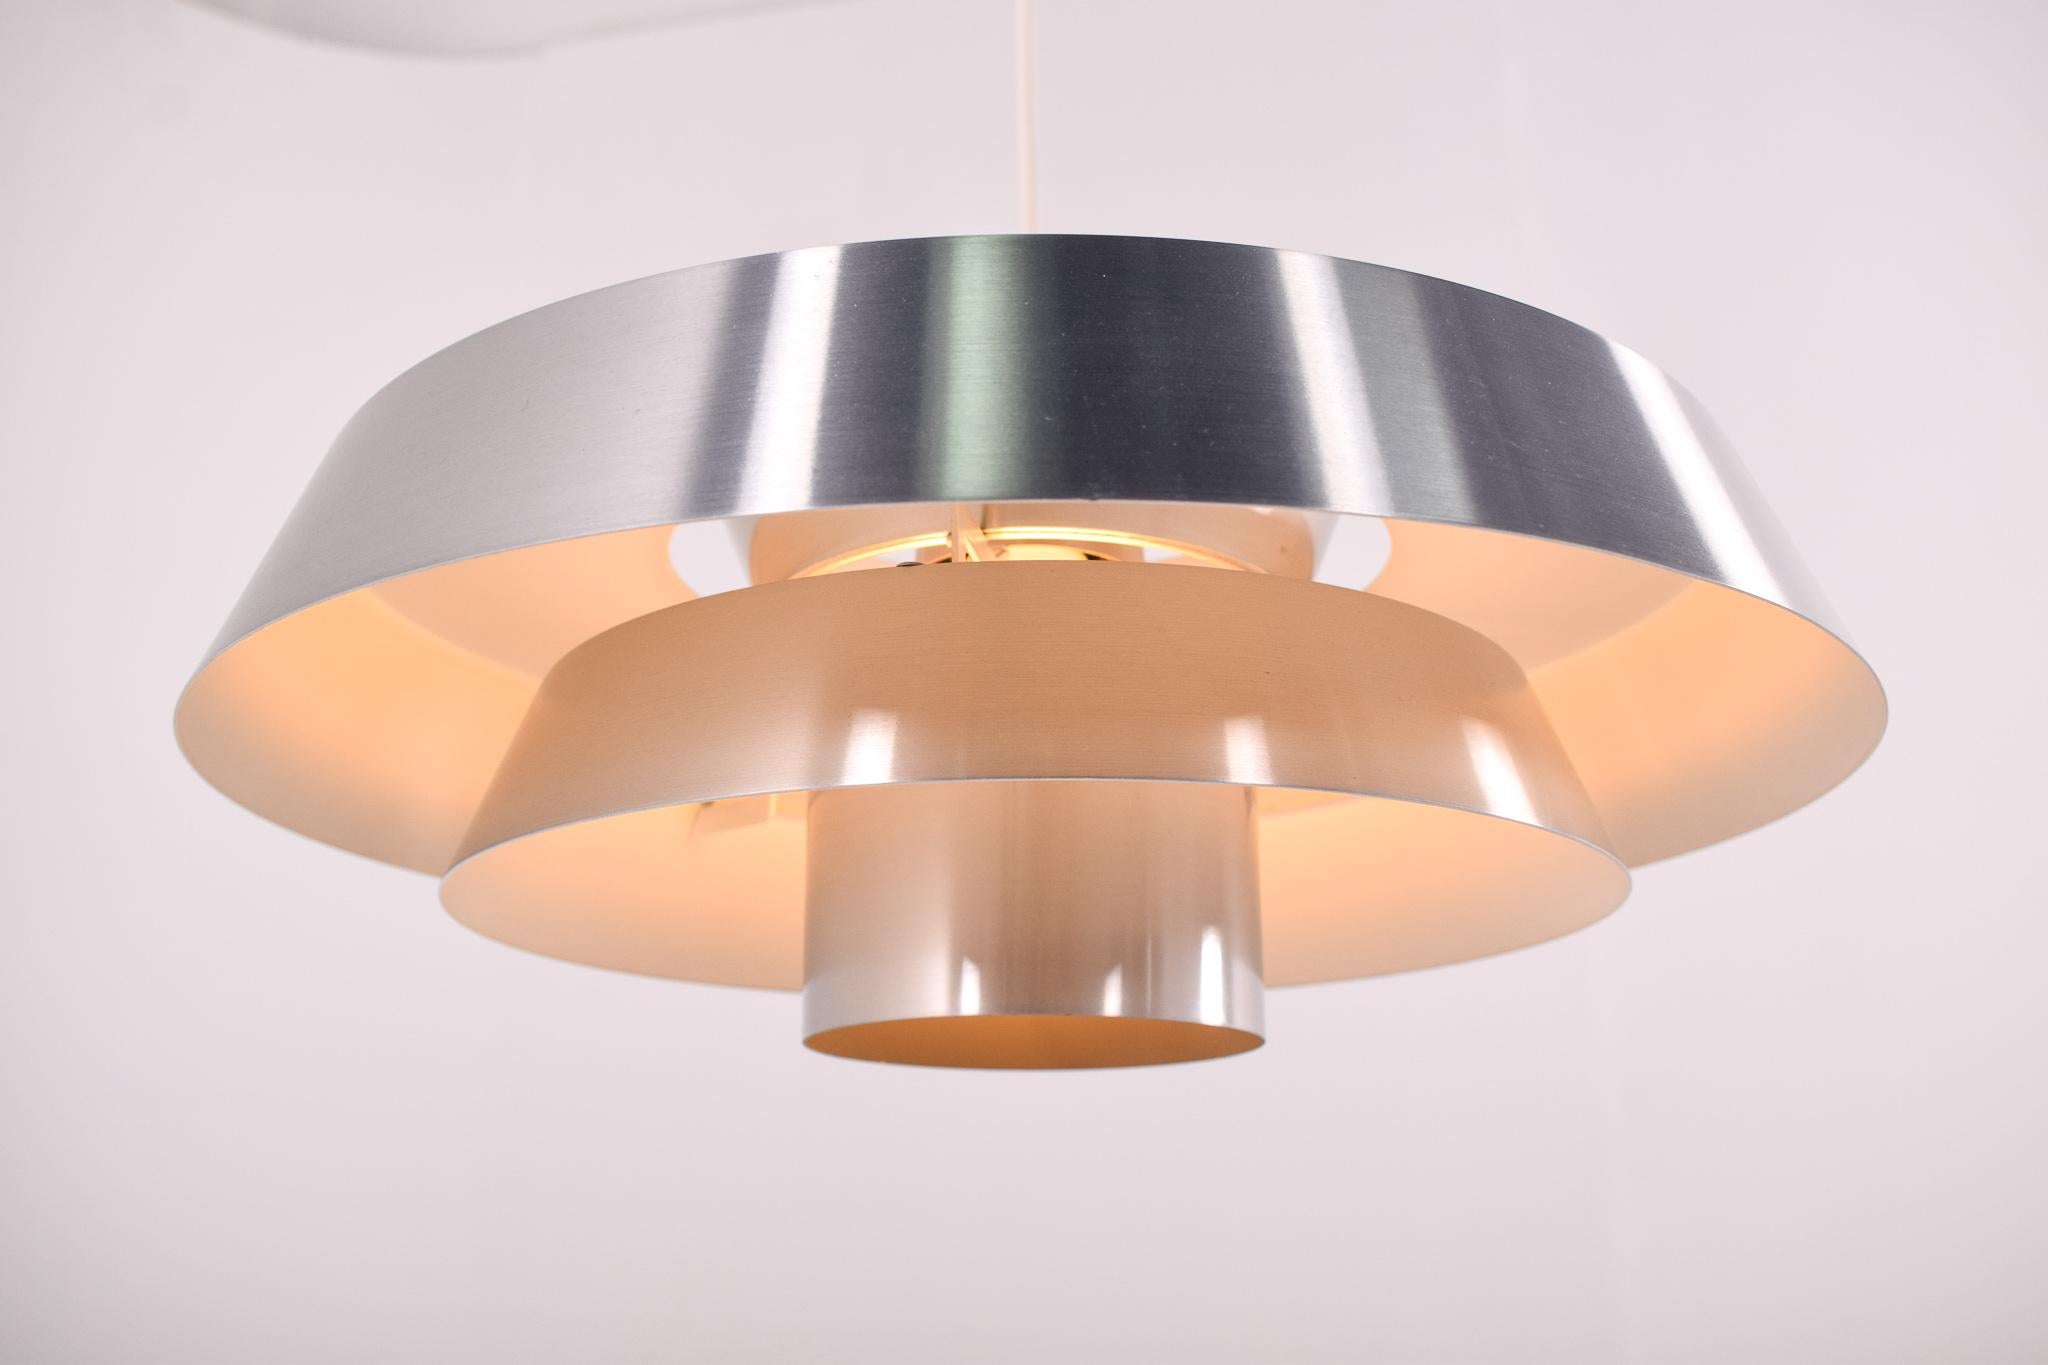 Pendant, model Nova, designed in the 1960s by Jo Hammerborg, main designer of Danish lighting manufacturer Fog & Mørup in the 1960s. The model was produced in three different metals: copper, brass, and aluminum. This one is made from aluminium.